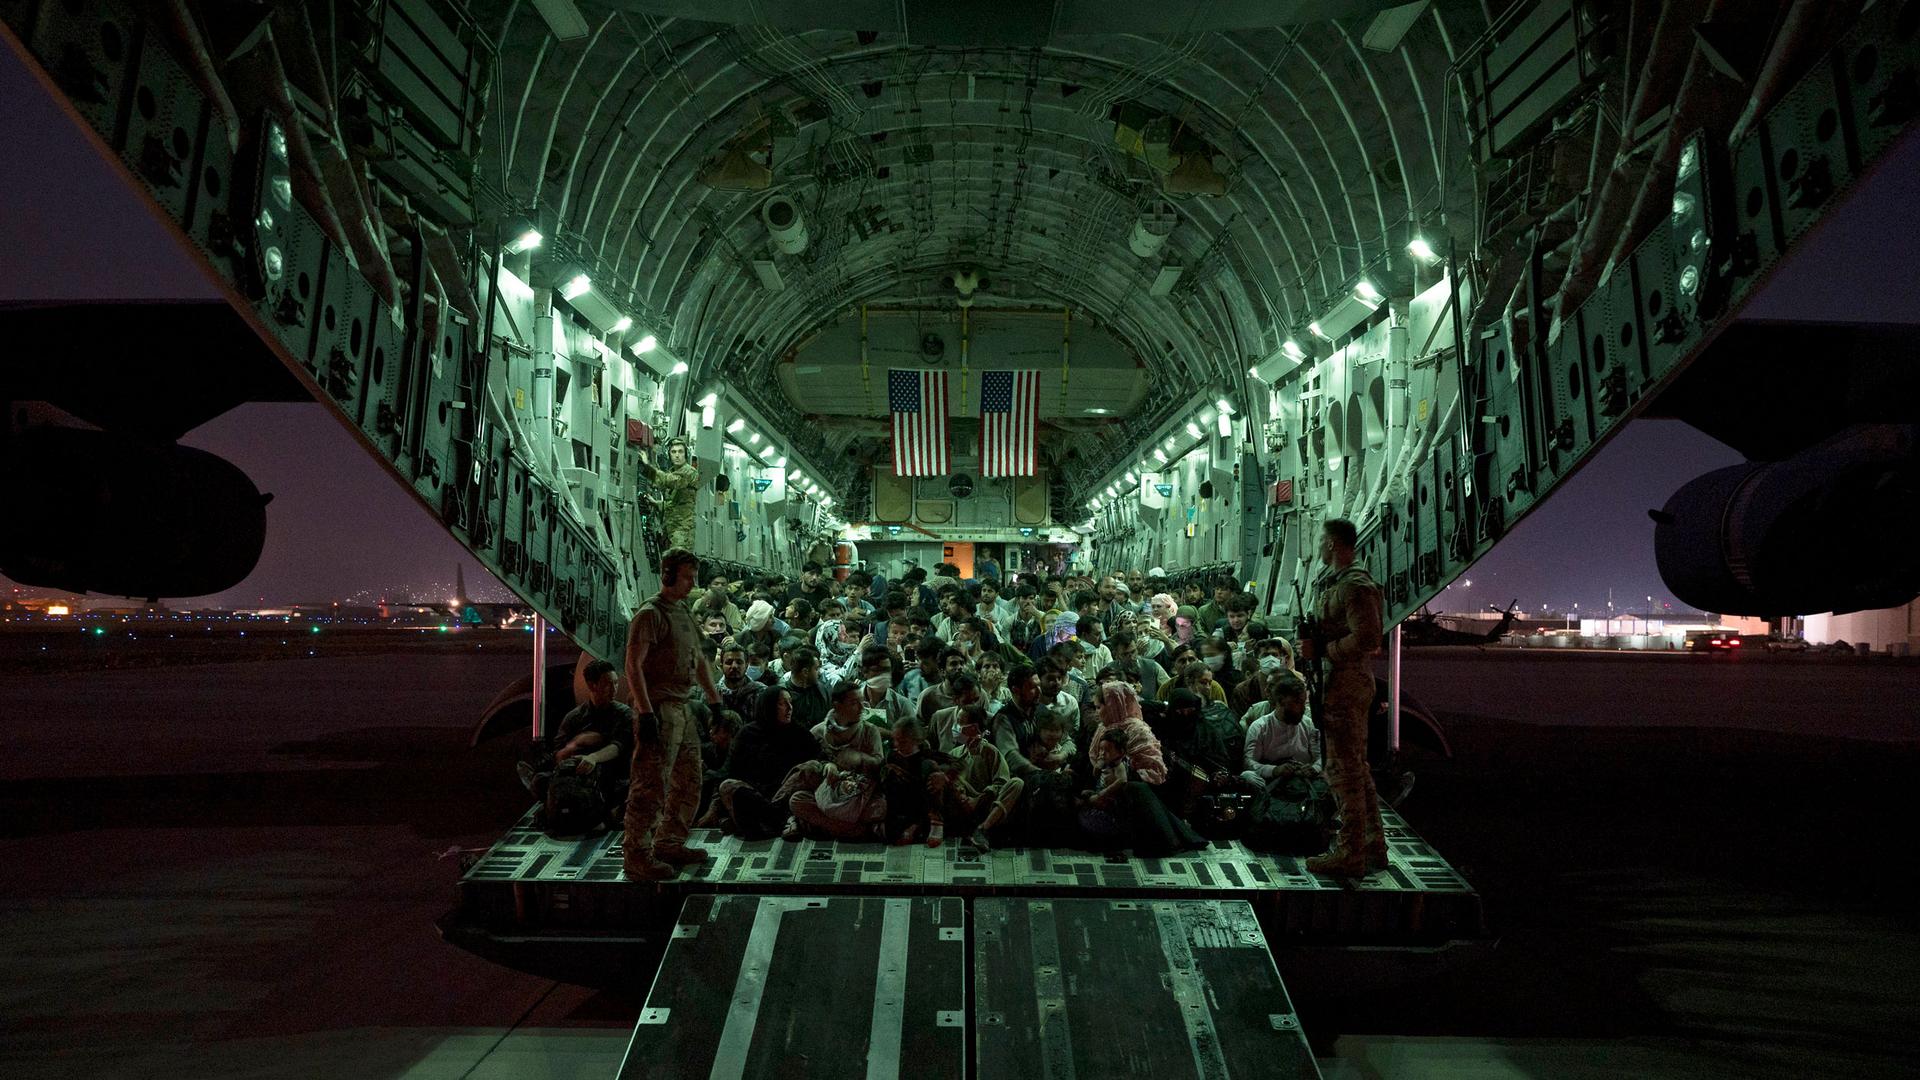 A large group of evacuees are shown in the back of a large Air Force aircraft with green-colored lights lining the inside.